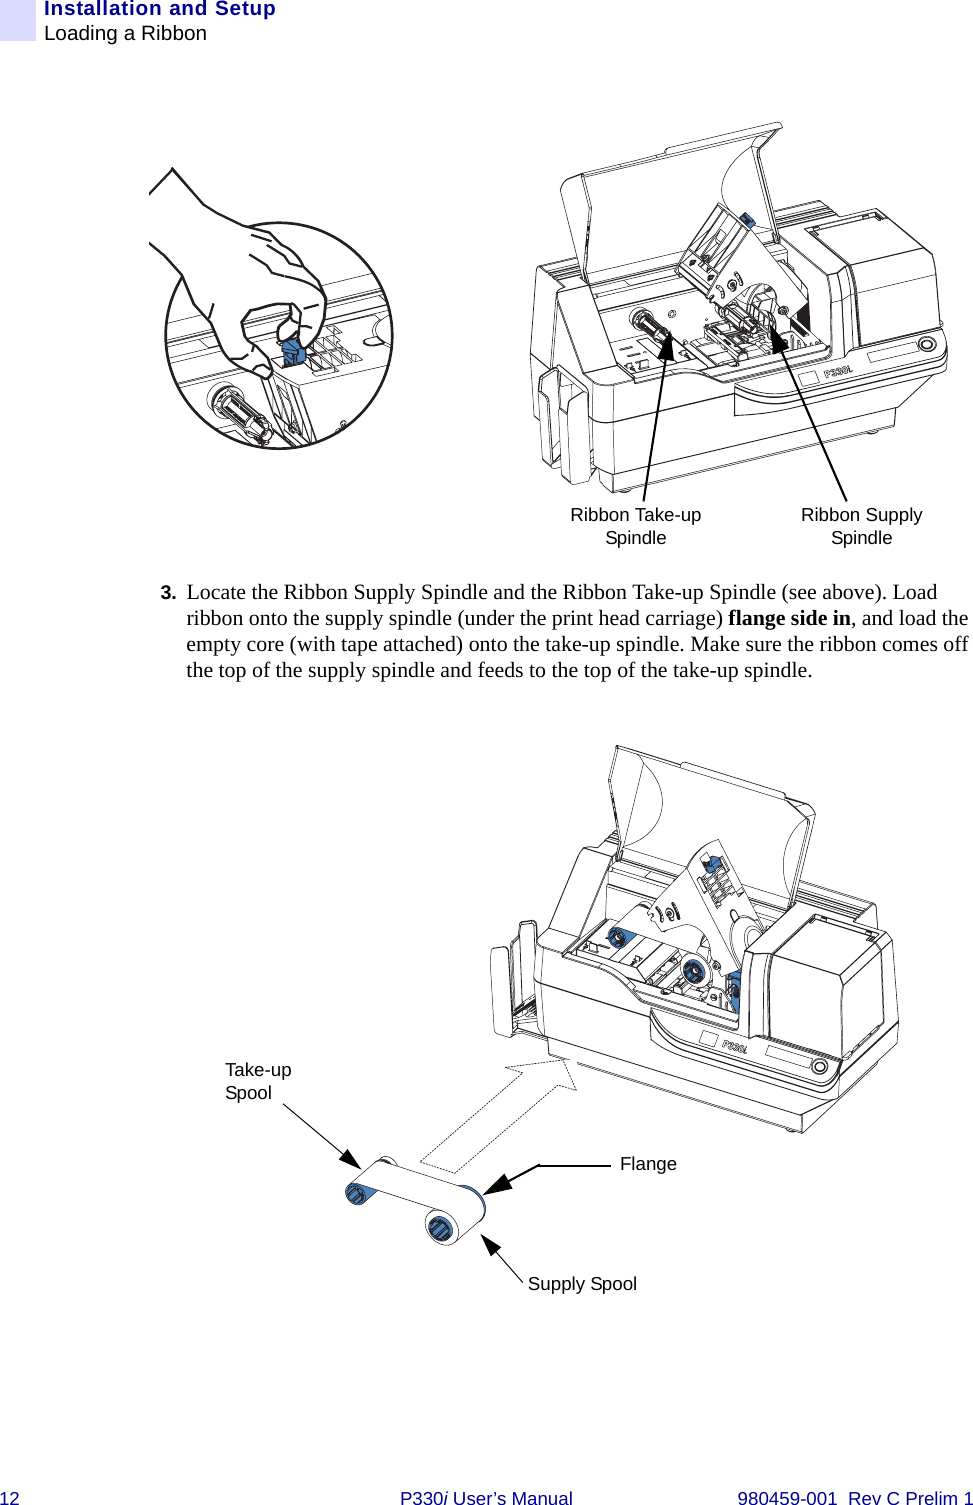 12 P330i User’s Manual 980459-001  Rev C Prelim 1Installation and SetupLoading a Ribbon3. Locate the Ribbon Supply Spindle and the Ribbon Take-up Spindle (see above). Load ribbon onto the supply spindle (under the print head carriage) flange side in, and load the empty core (with tape attached) onto the take-up spindle. Make sure the ribbon comes off the top of the supply spindle and feeds to the top of the take-up spindle.Ribbon Supply SpindleRibbon Take-up SpindleFlangeSupply SpoolTake-up Spool